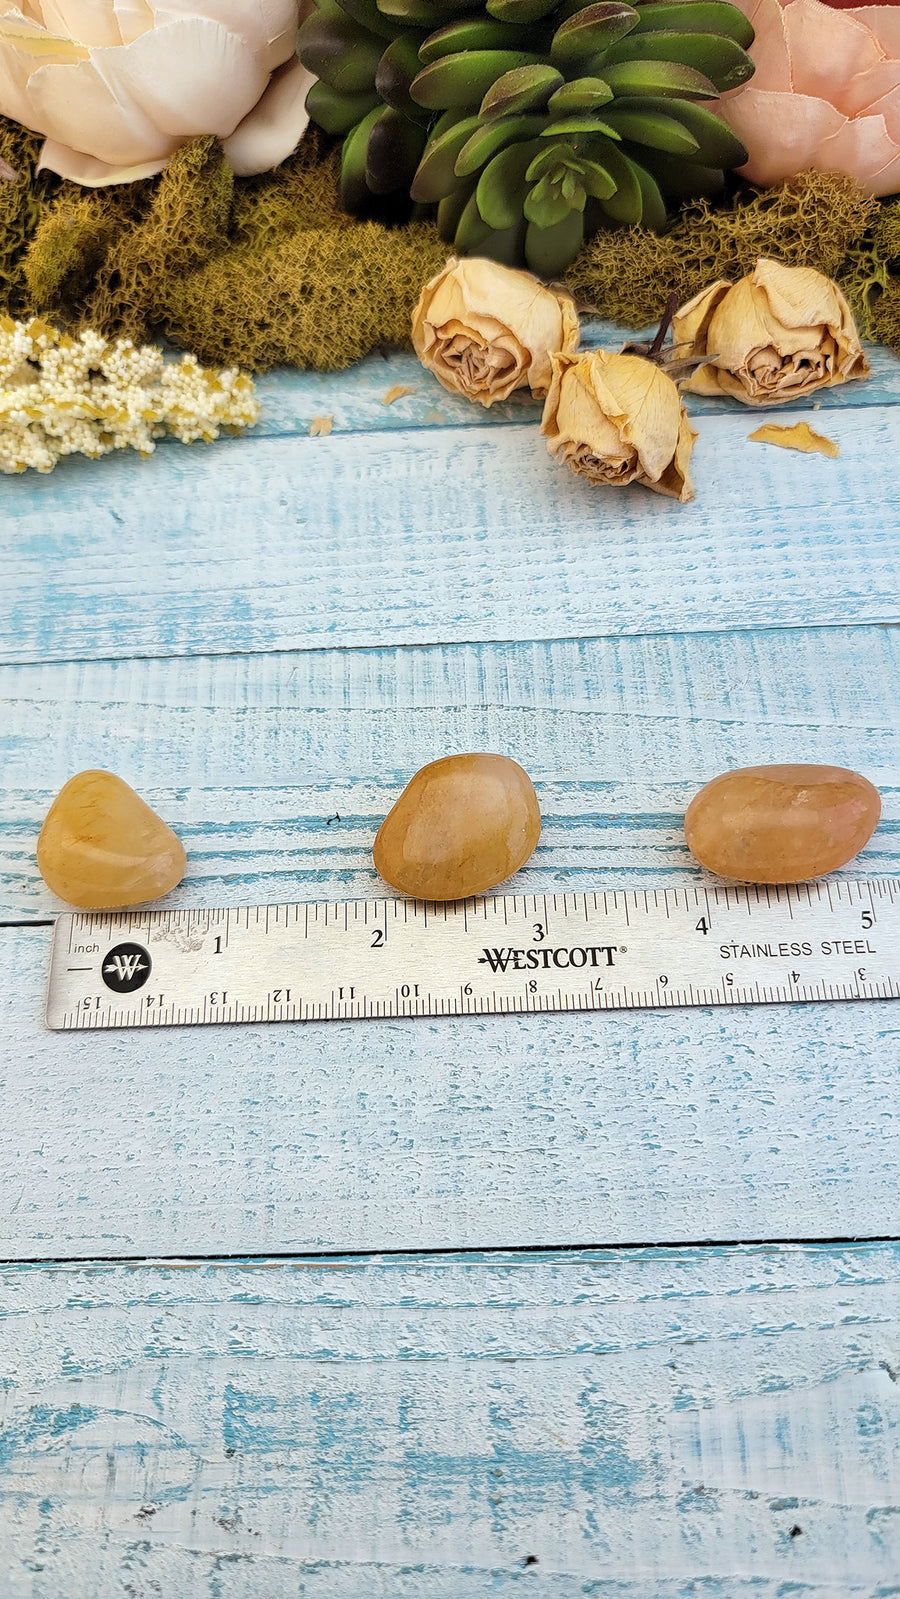 tumbled yellow aventurine crystal pieces on ruler for measurement